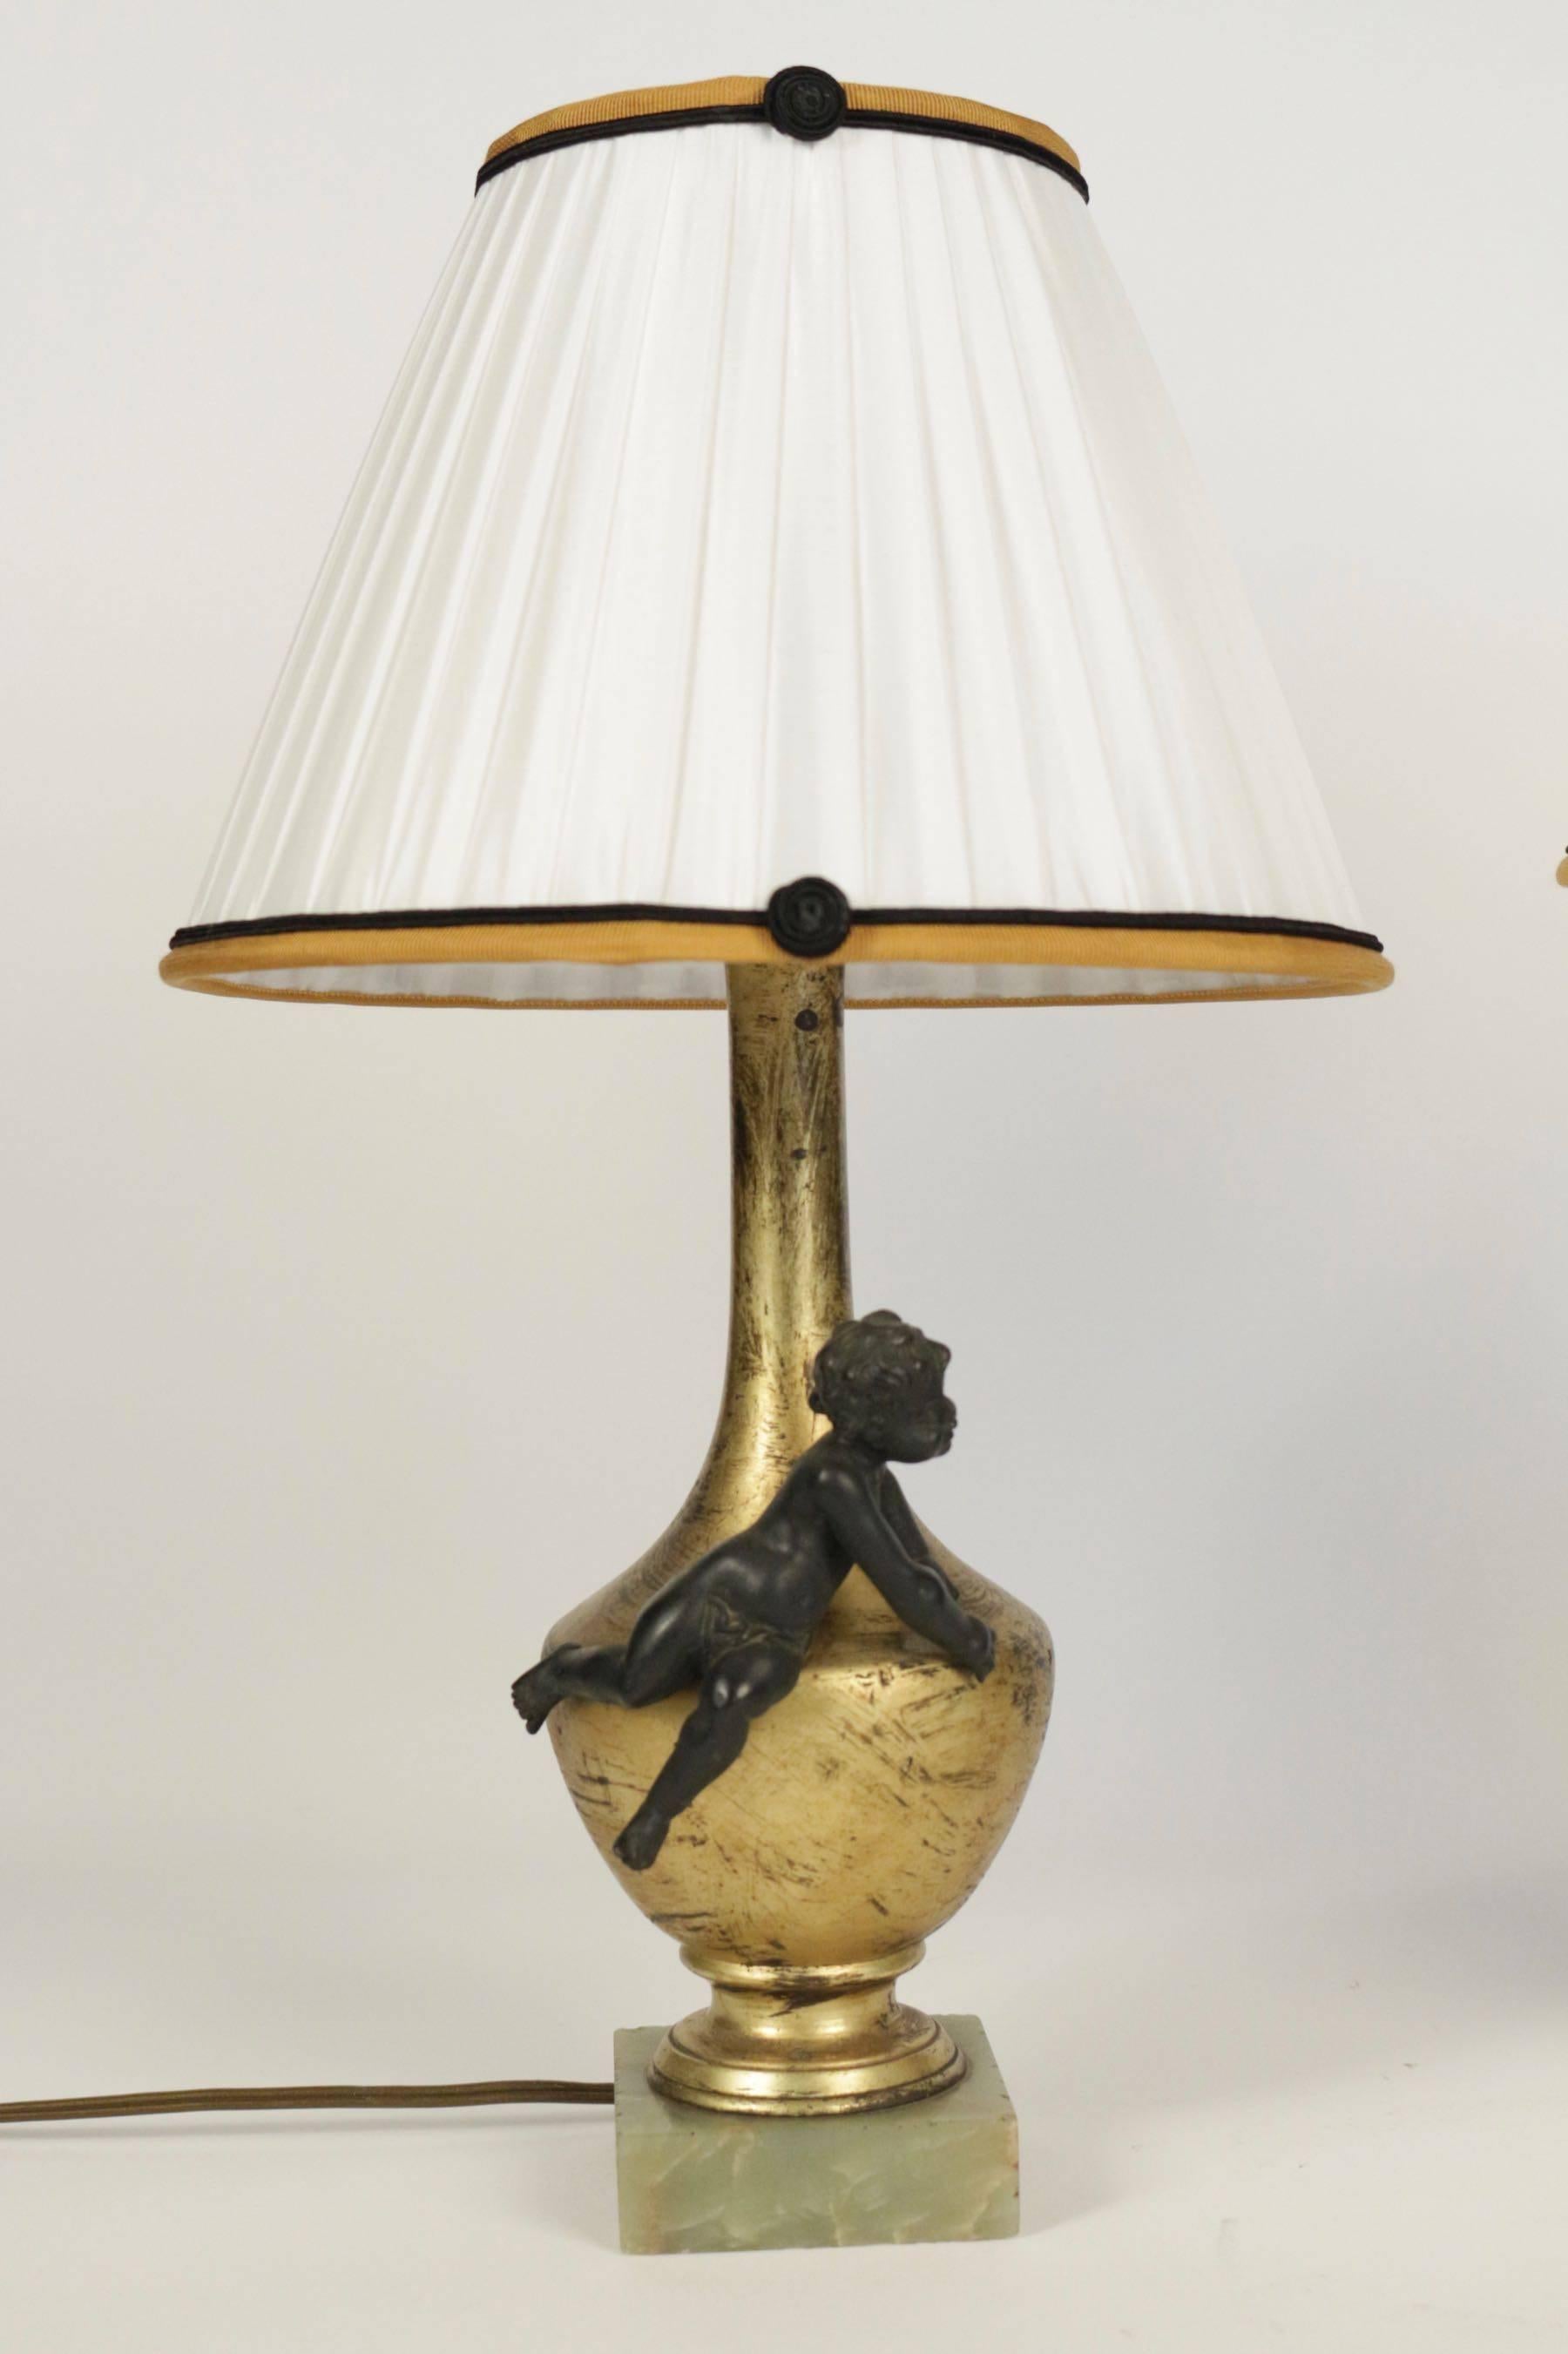 French Pair of Exceptional Matching Napoleon III Lamps from the 19th Century